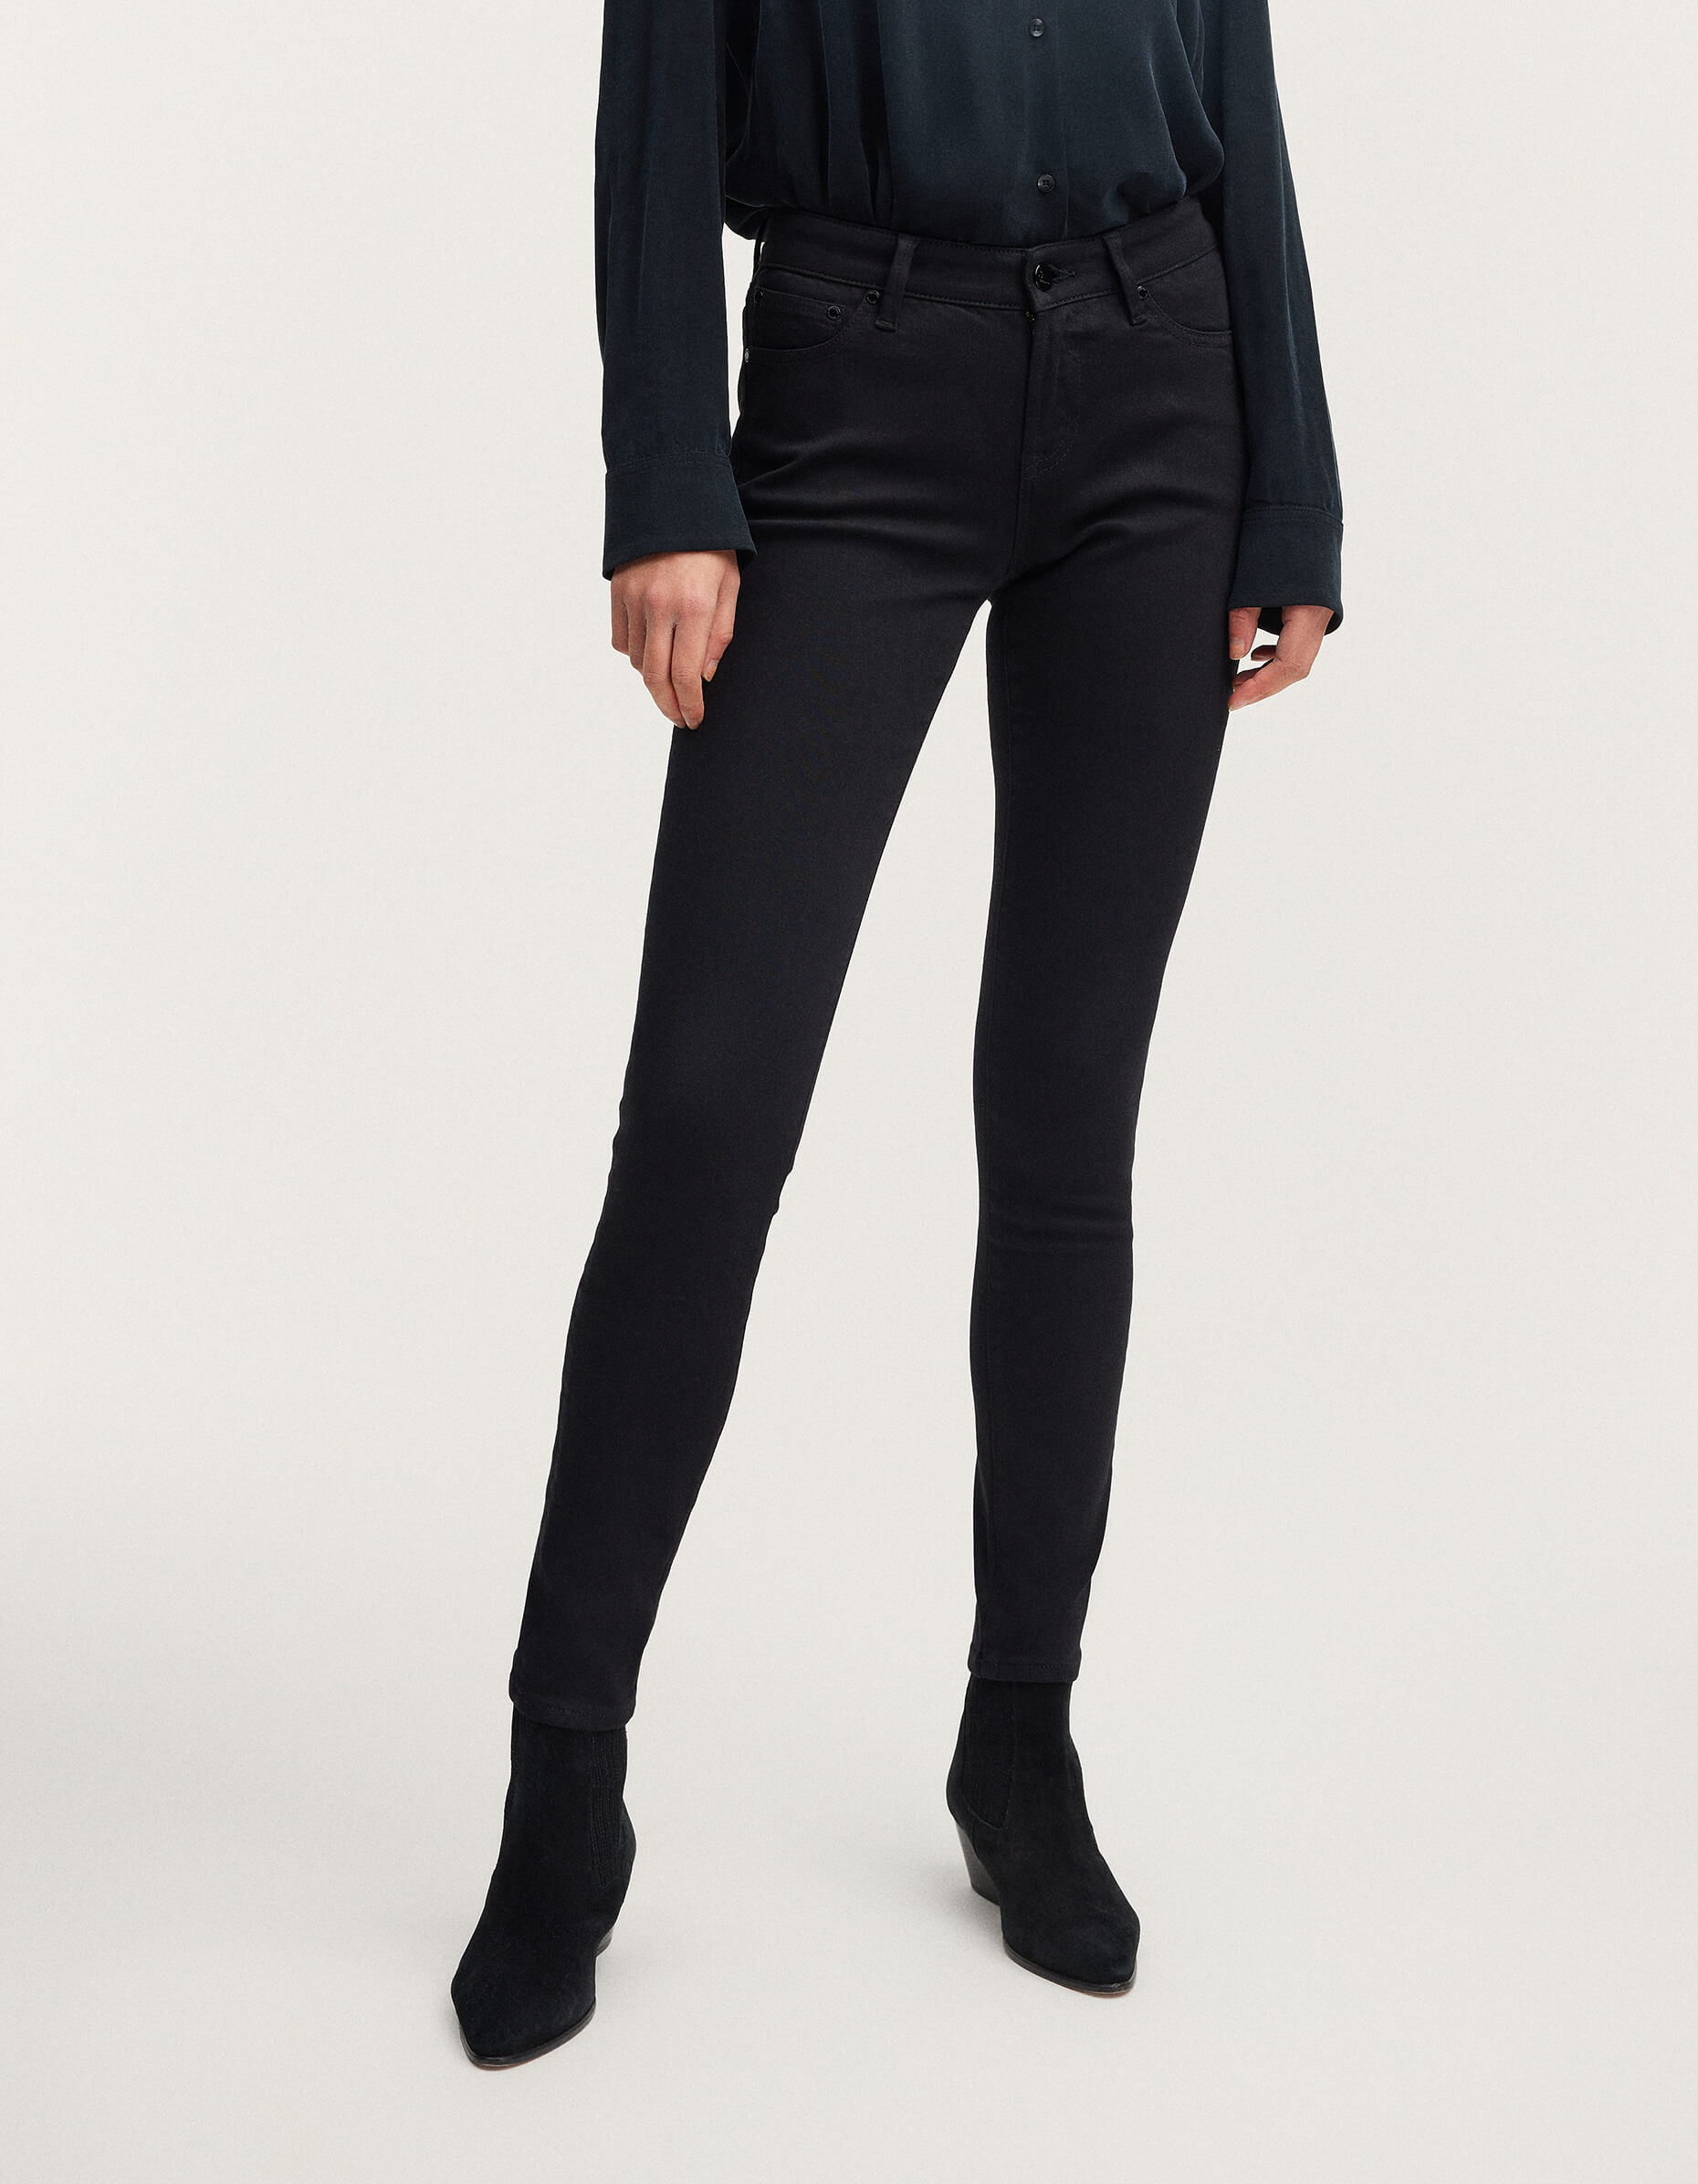 Women Jeans - Tight Fit - Spray